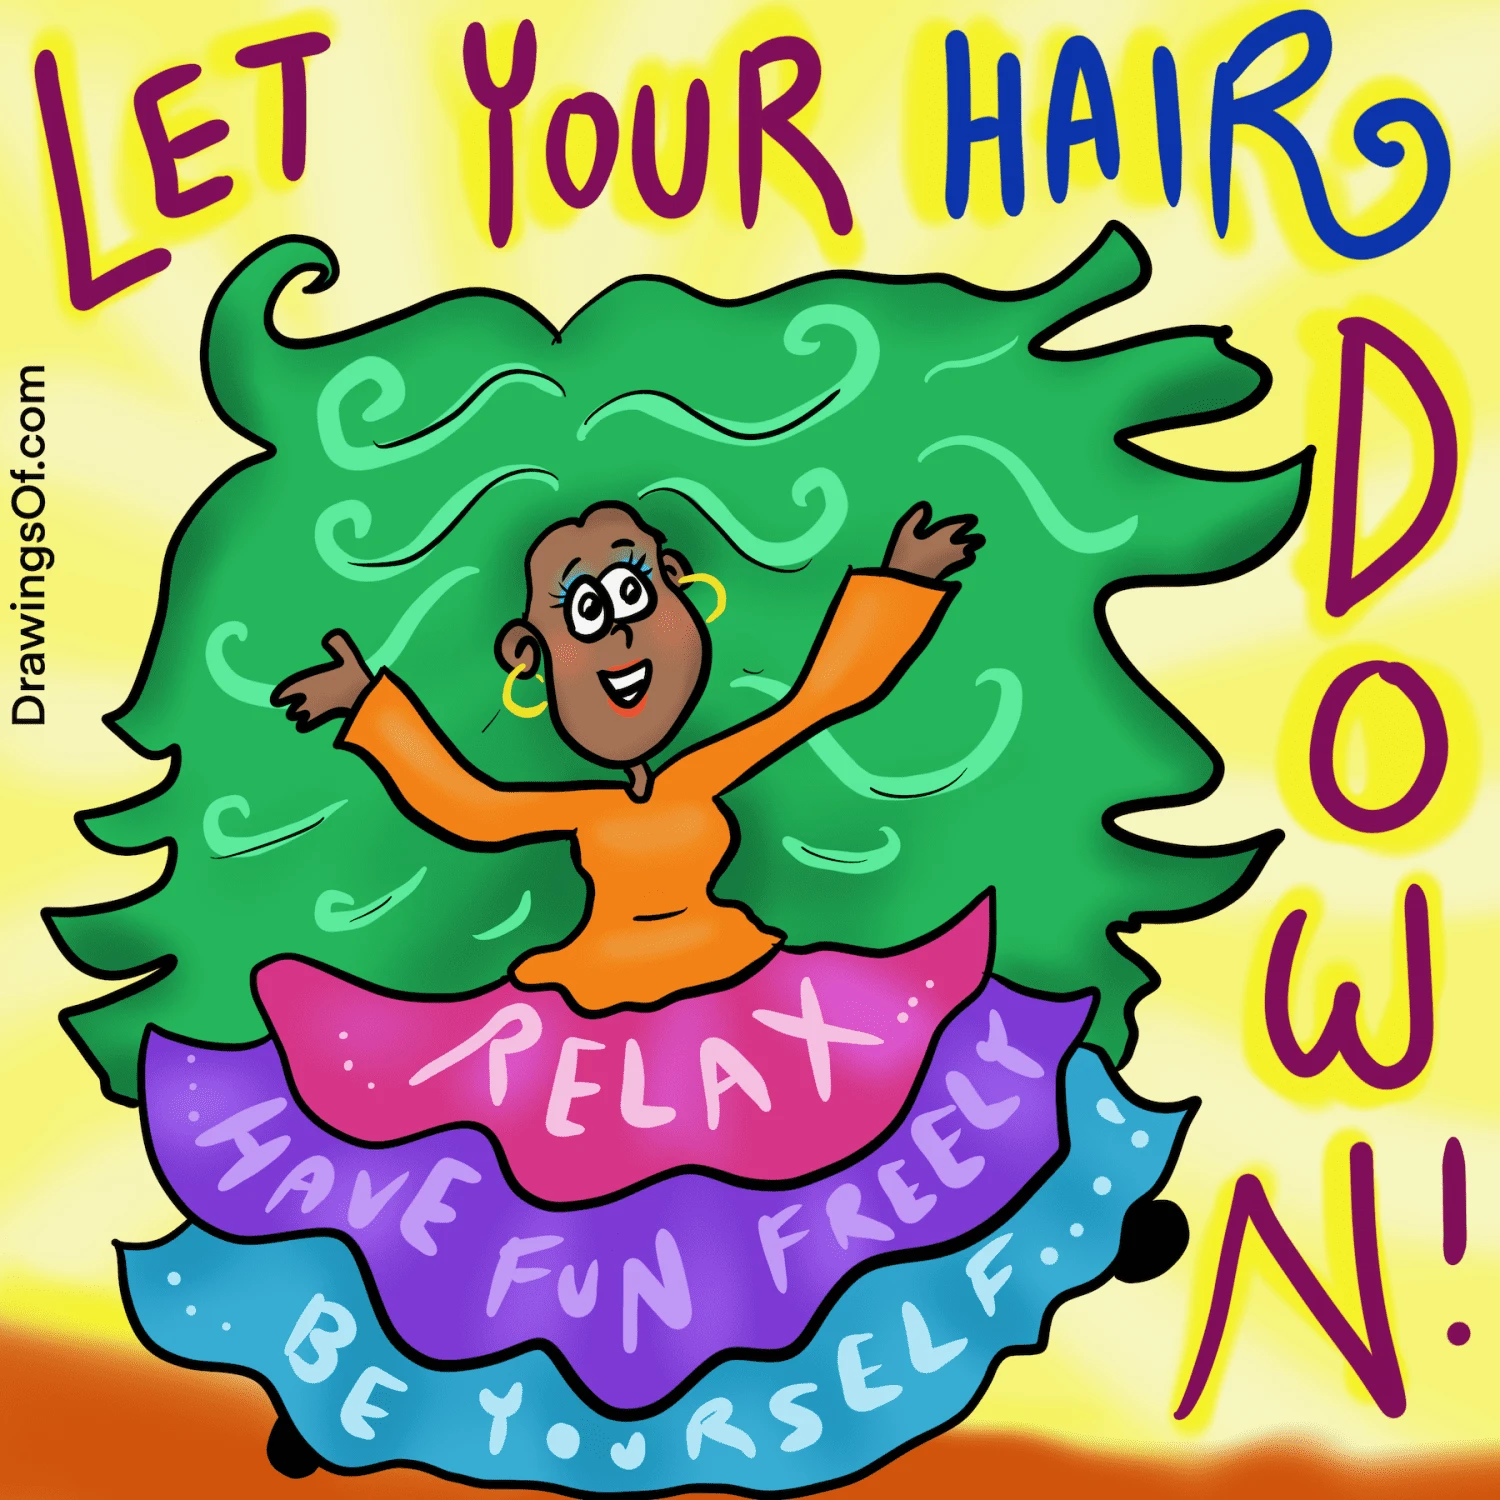 "Let your hair down" meaning, illustrated.